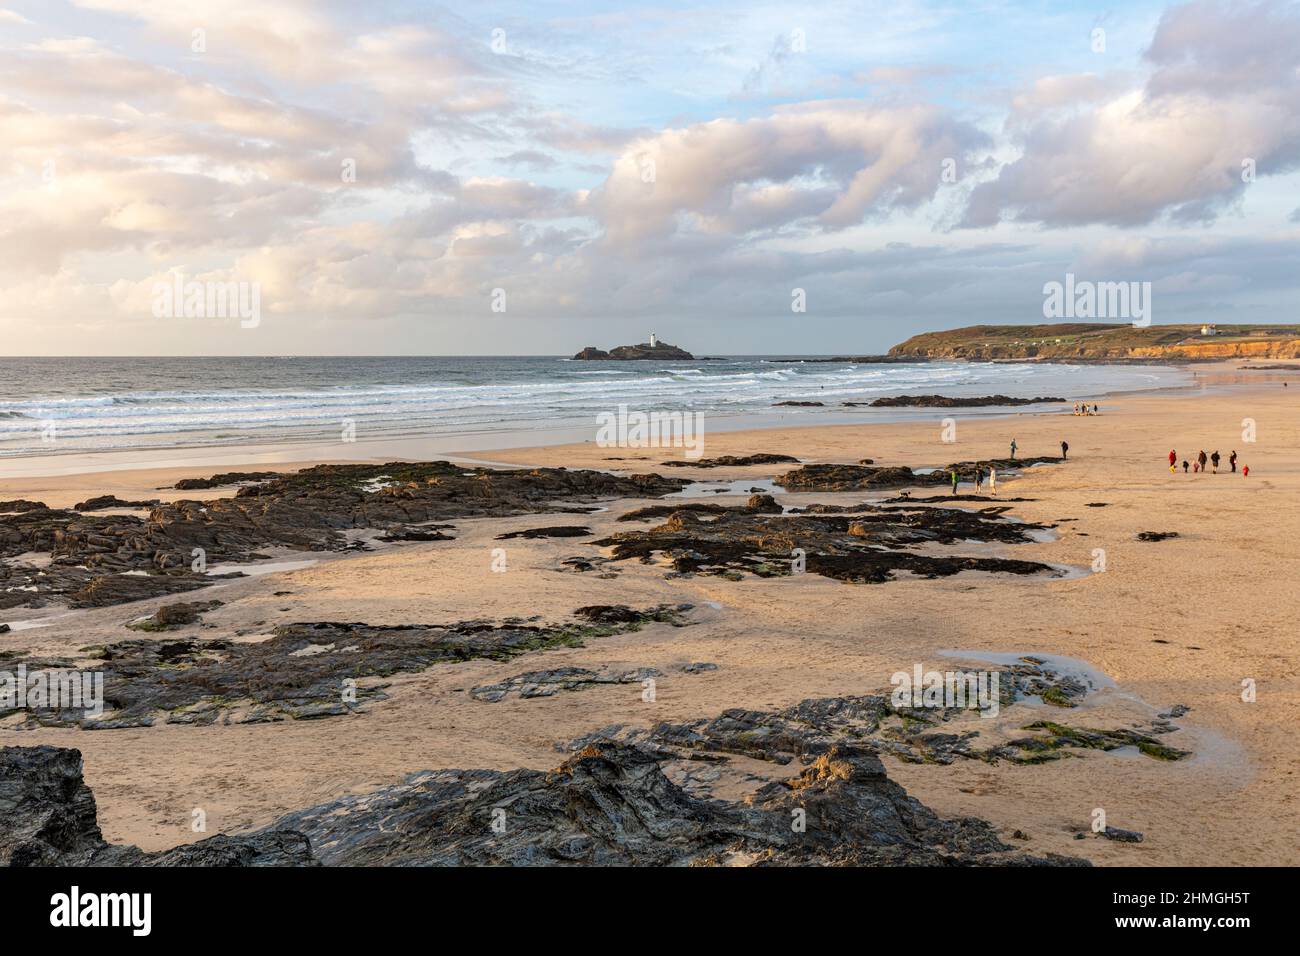 Godrevy lighthouse from Hayle beach, Cornwall, UK, England,Godrevy lighthouse,Hayle beach,Hayle Cornwall, Gwithian Hayle,Gwithian,beach,beaches,sea Stock Photo